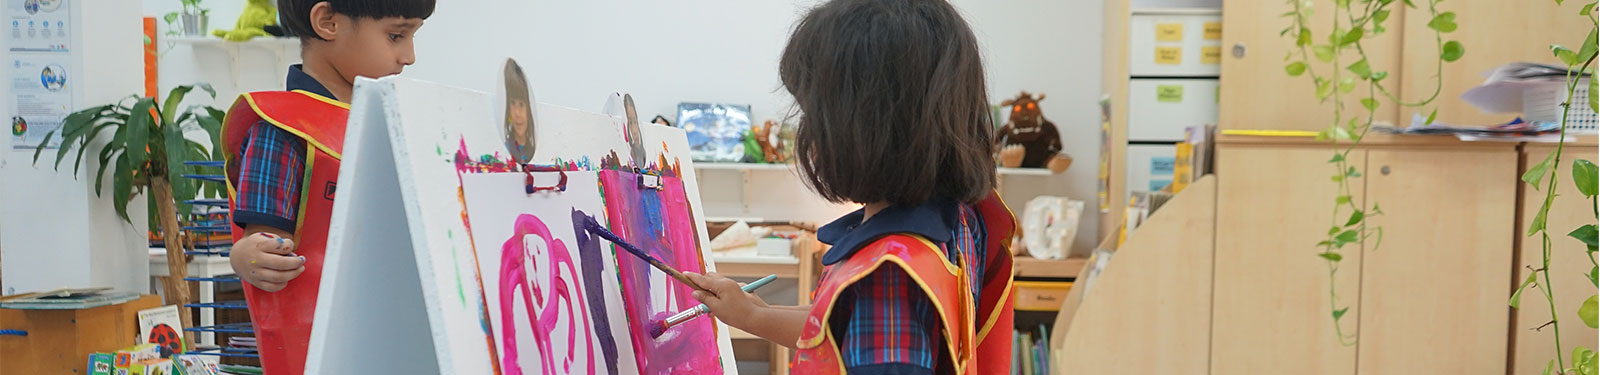 Kindergarten students express their feeling and emotions through art painting